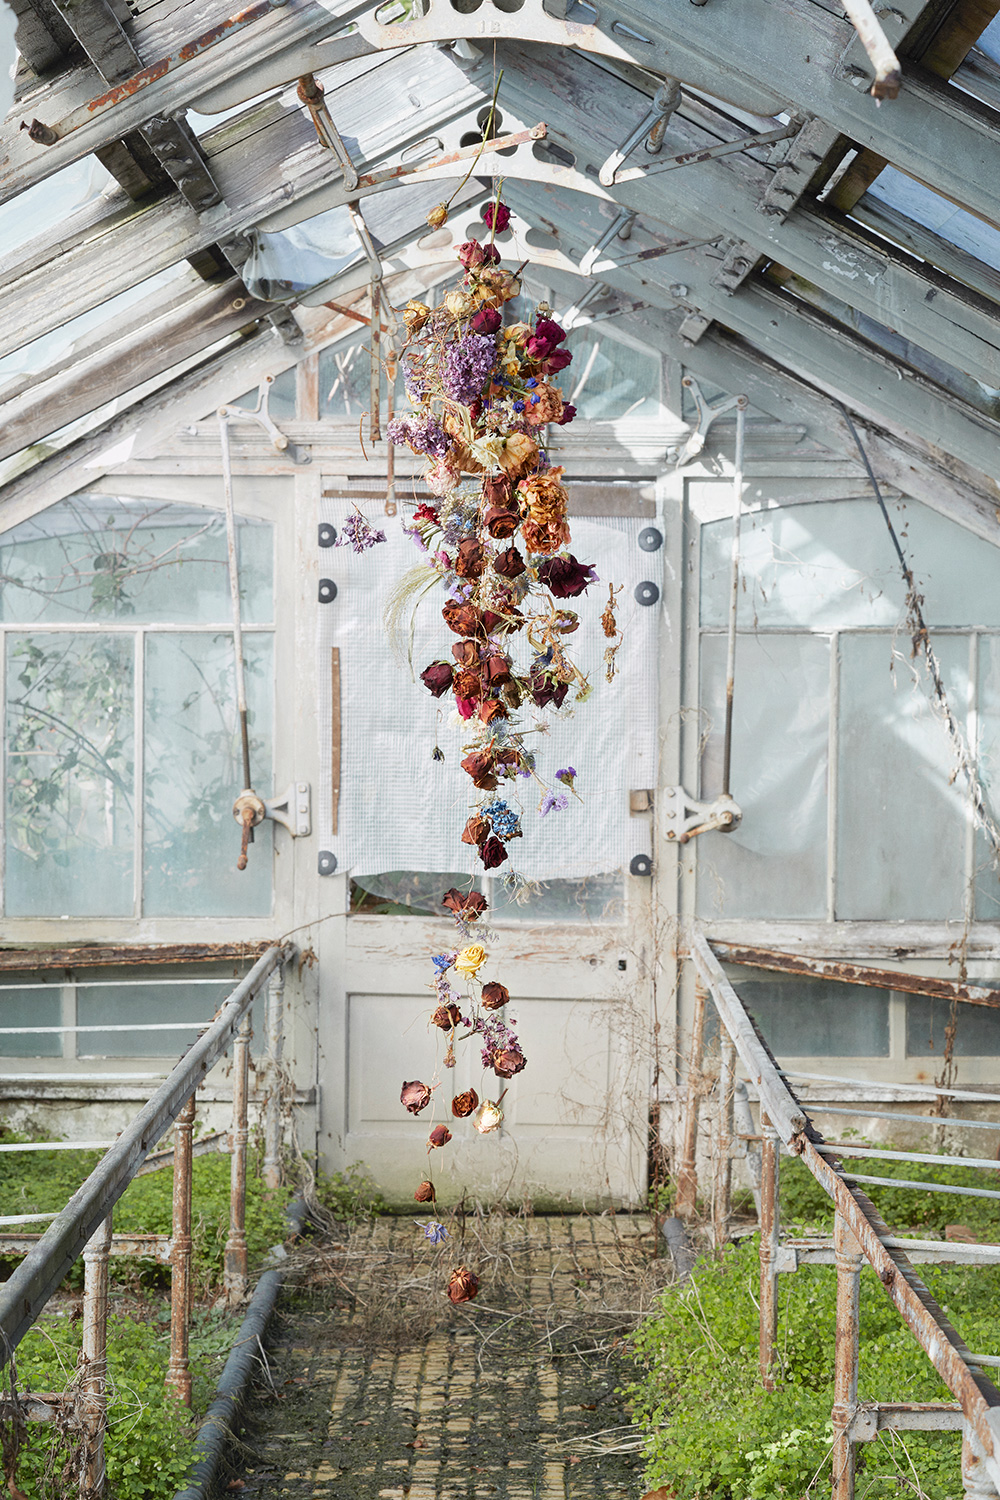 Rebecca Louise Law: Painting on Air